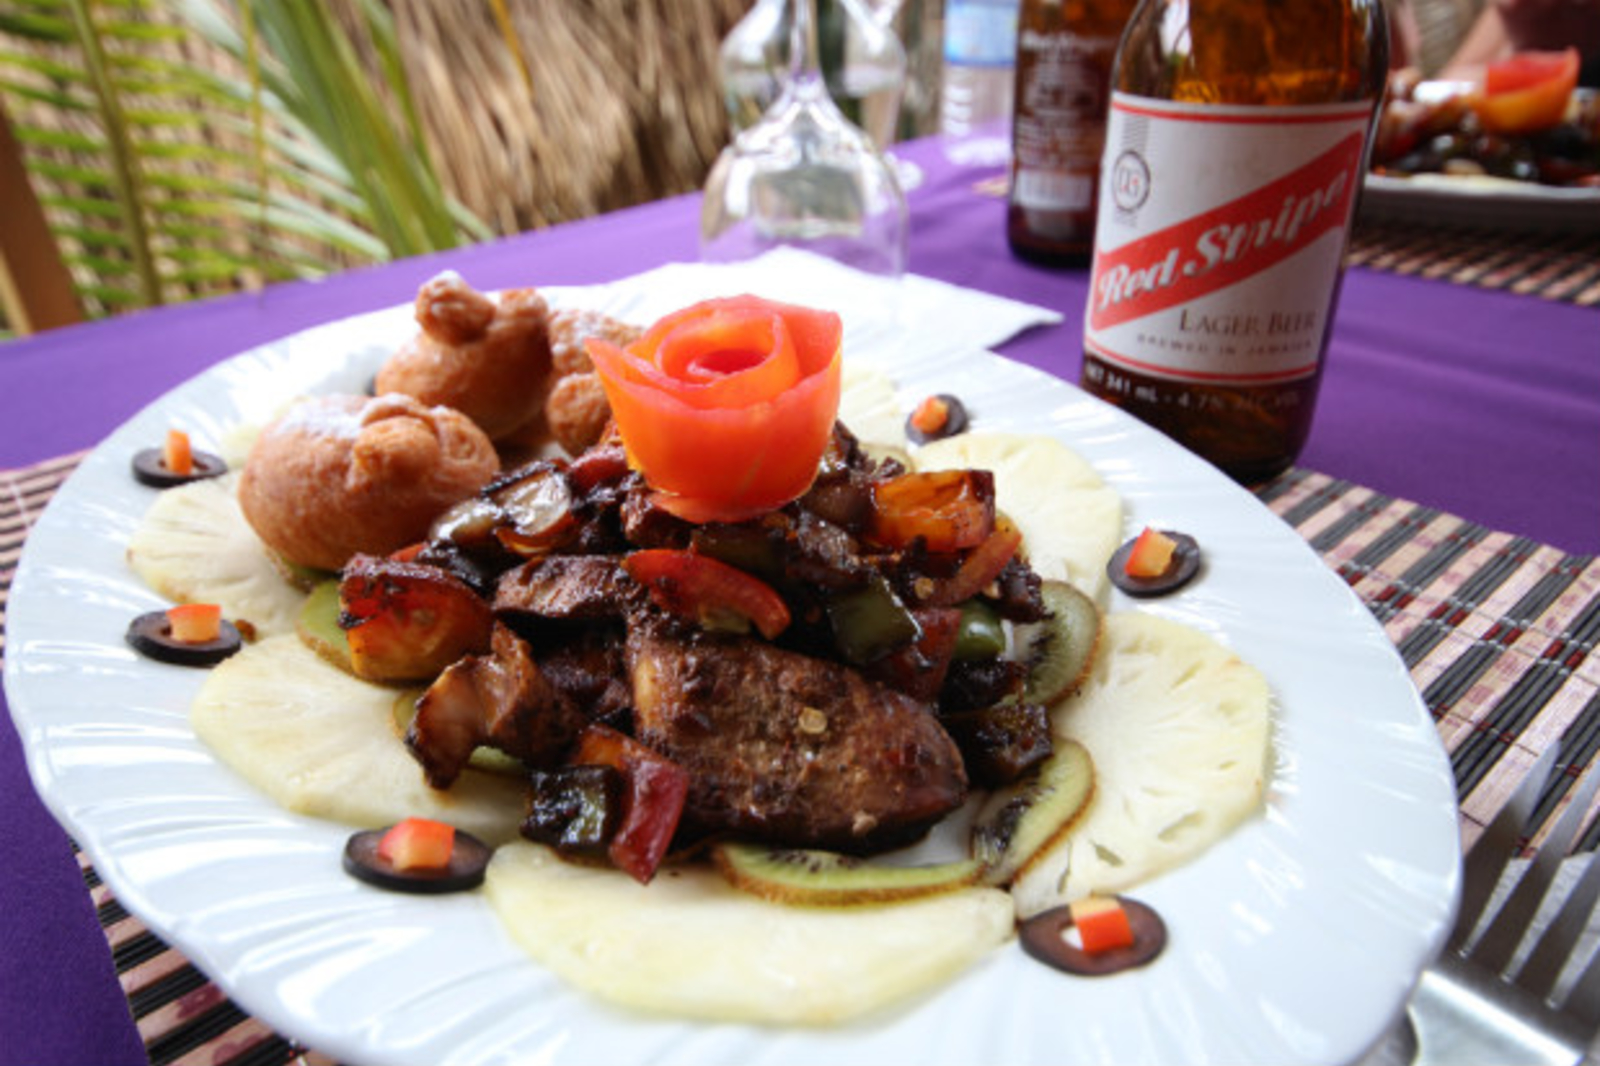 Traditional Jamaican cuisine with red wine